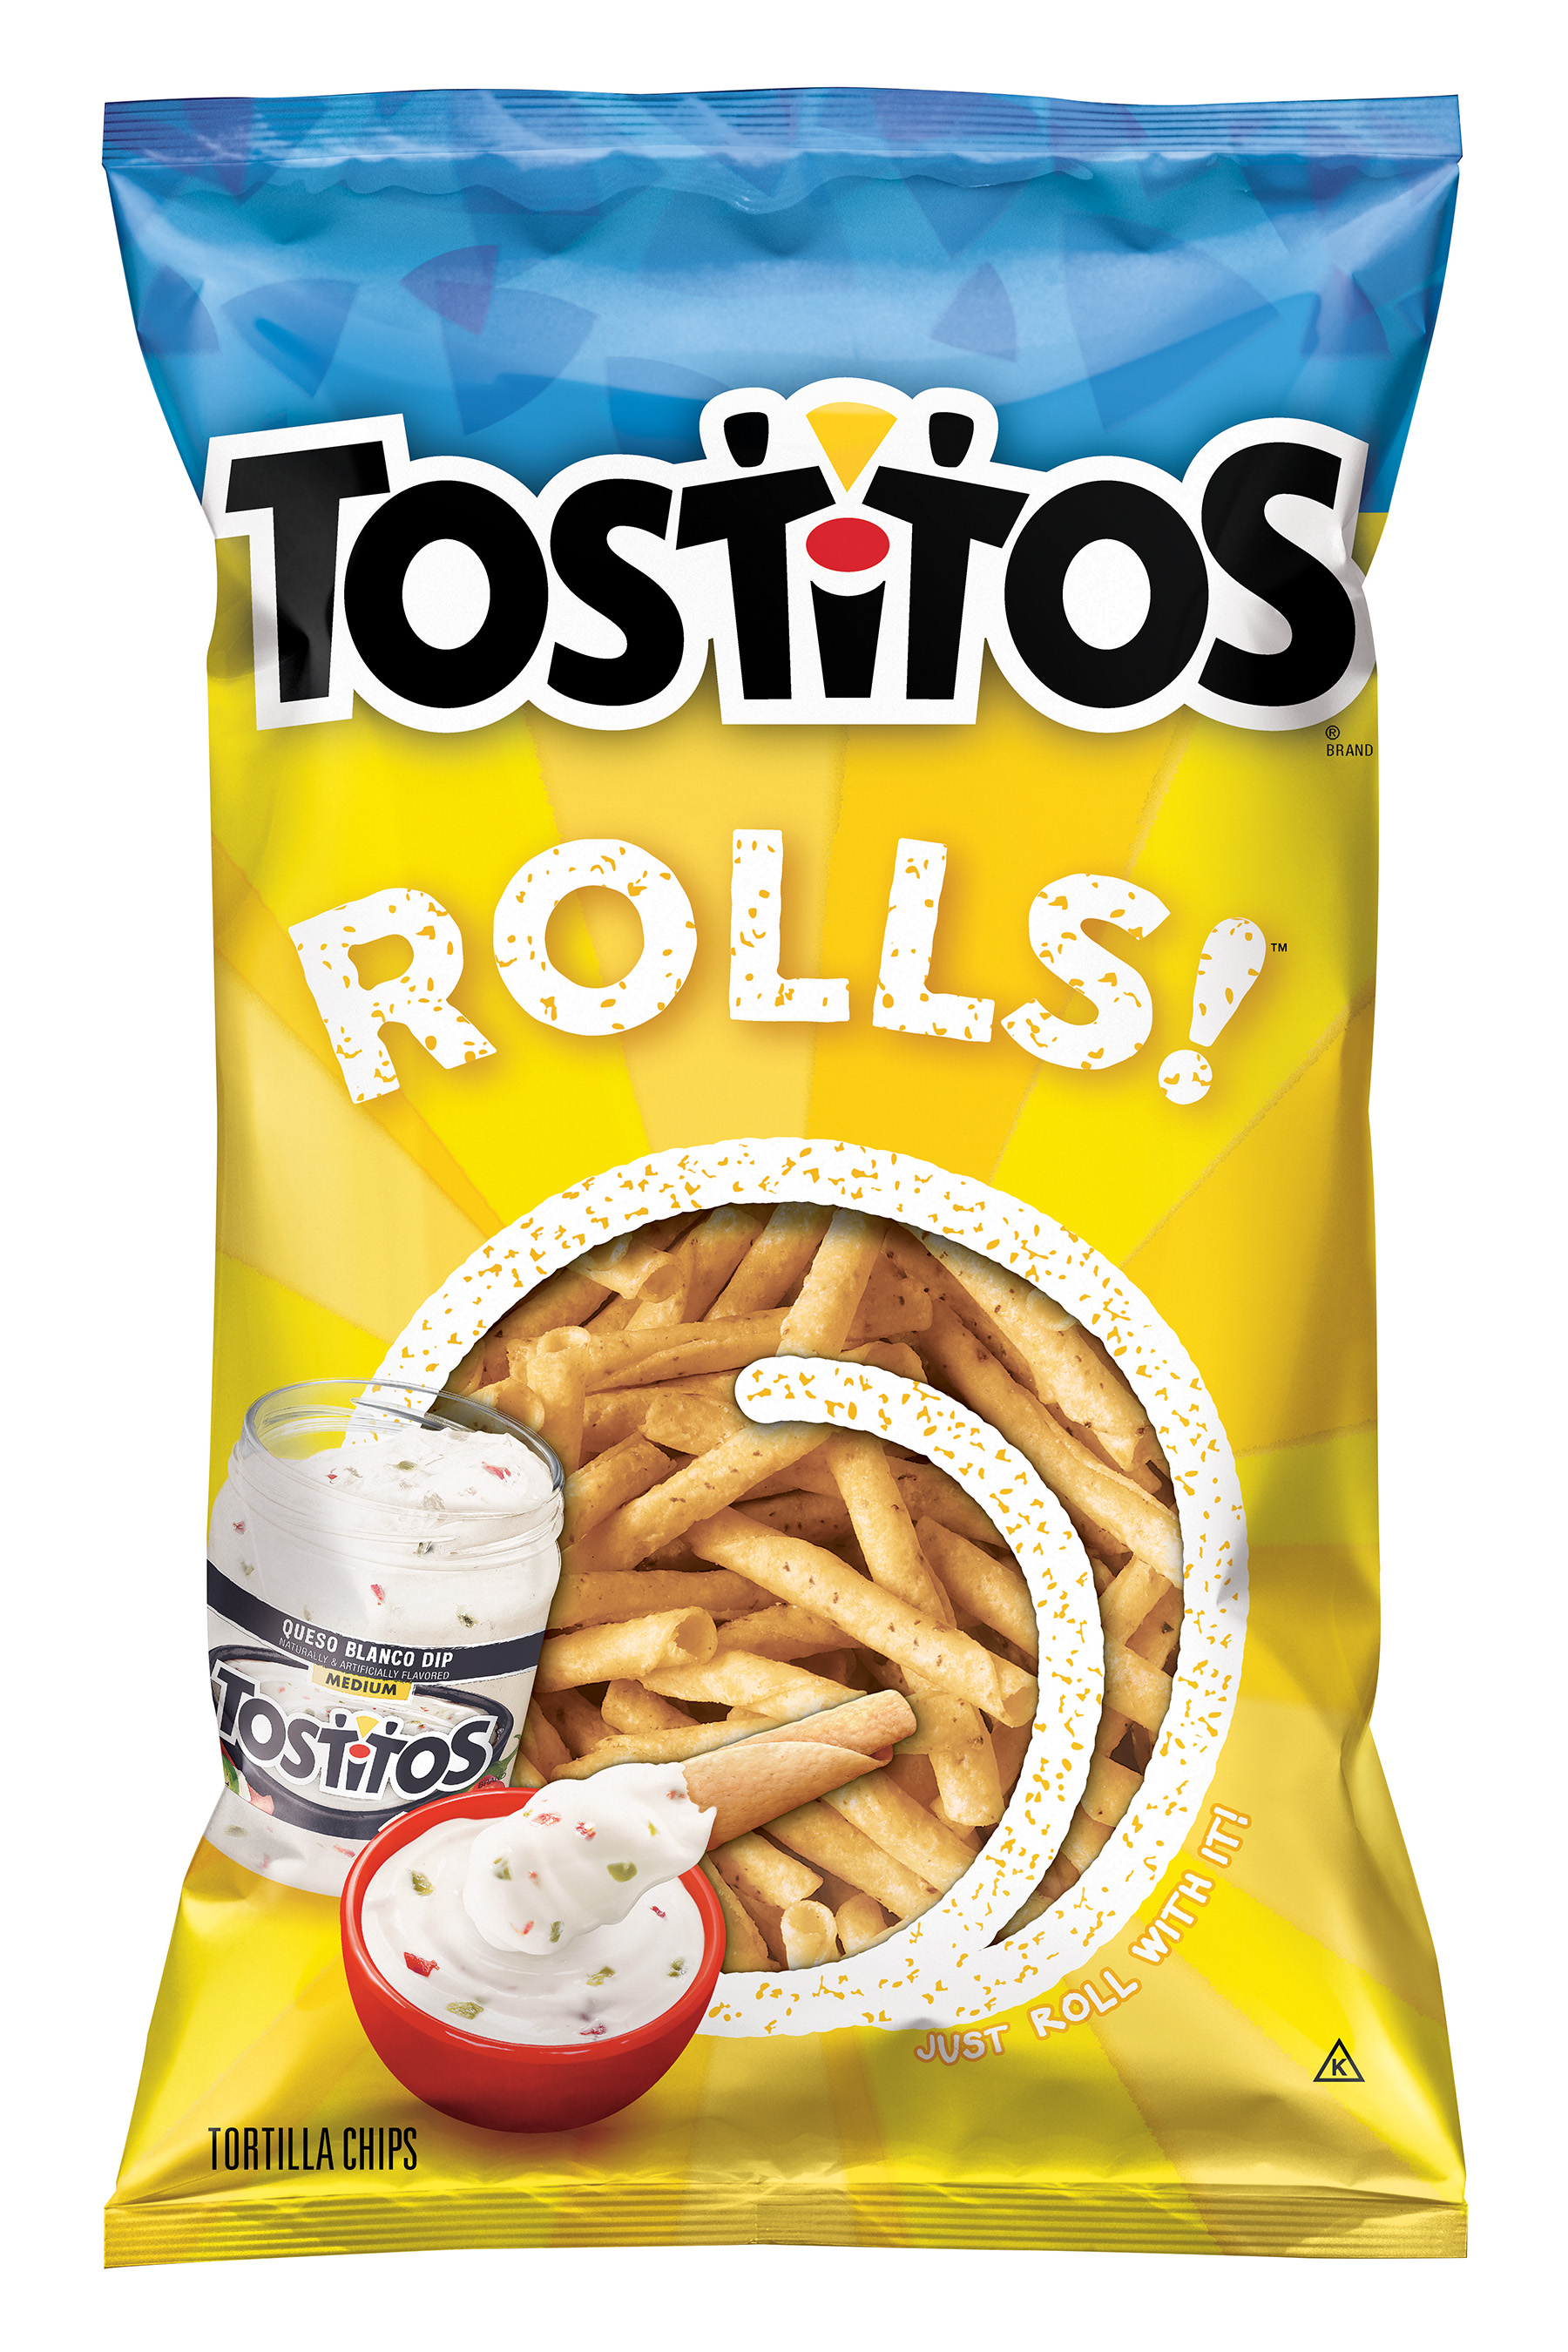 TOSTITOS Rolls! are the perfect chip for queso! Their unique rolled shape creates the ideal tool for navigating all those thicker party dips and provides a great, hearty crunch. With TOSTITOS Rolls! you can bring on the queso and bring on the fun!